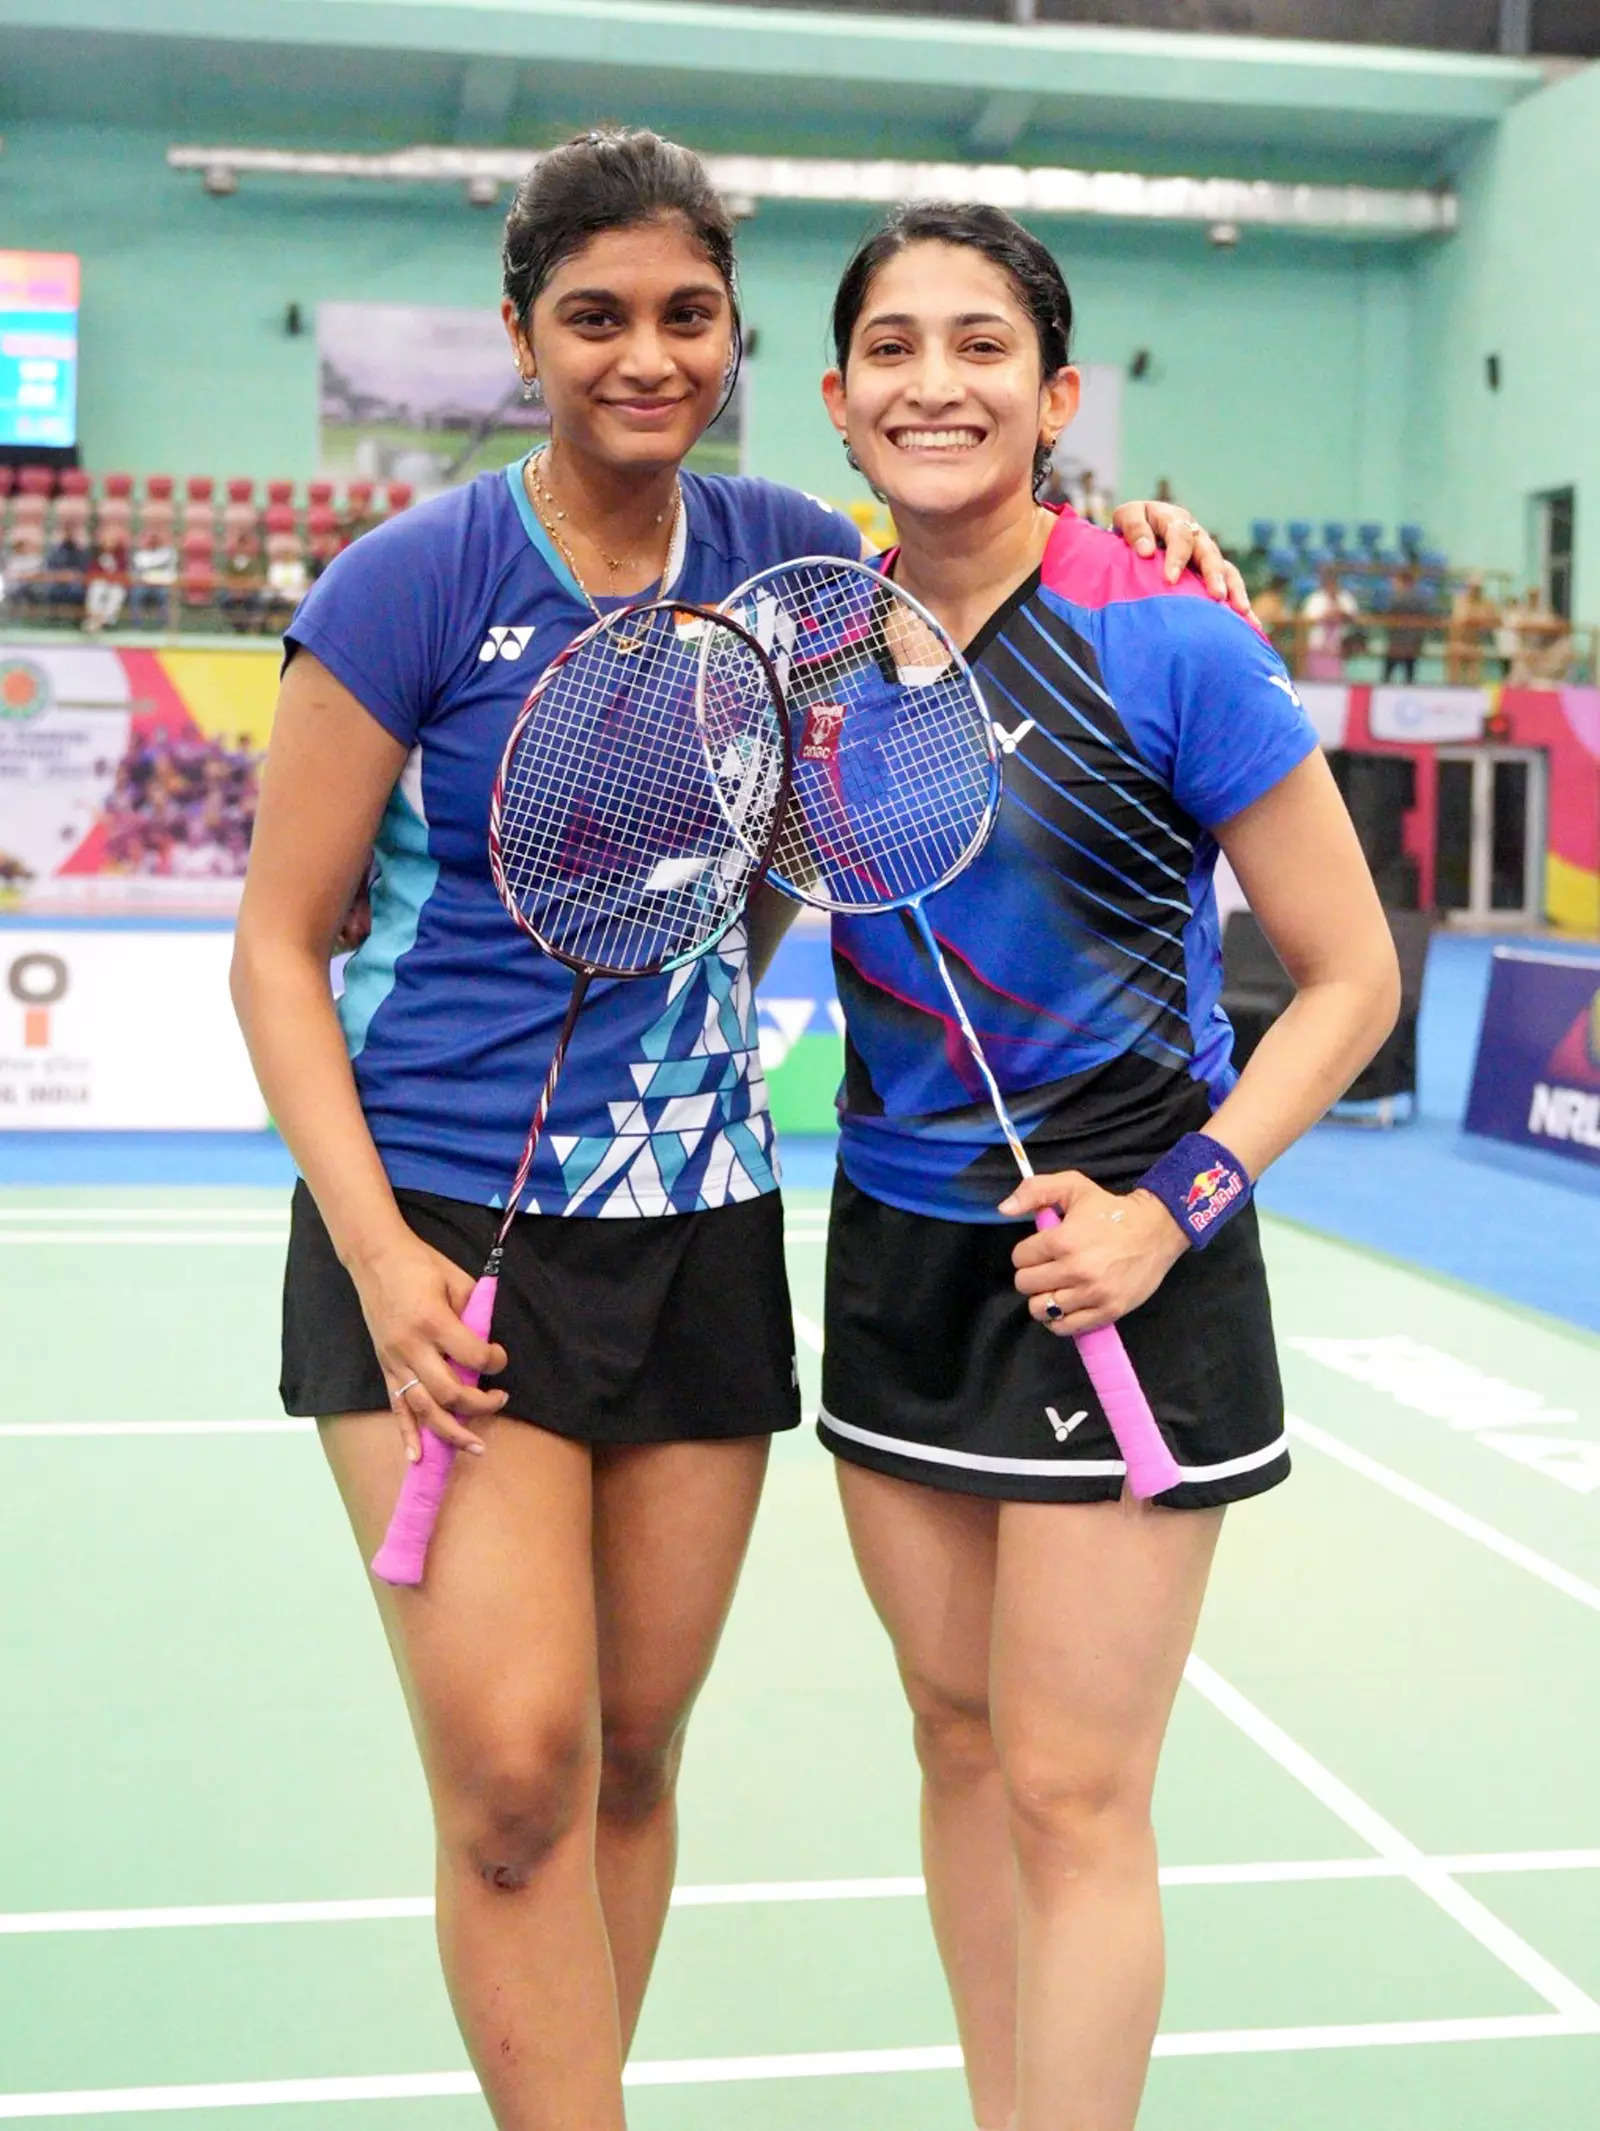 It all started over a meal: Ashwini Ponnappa and Tanisha Crasto’s journey to Paris Olympics